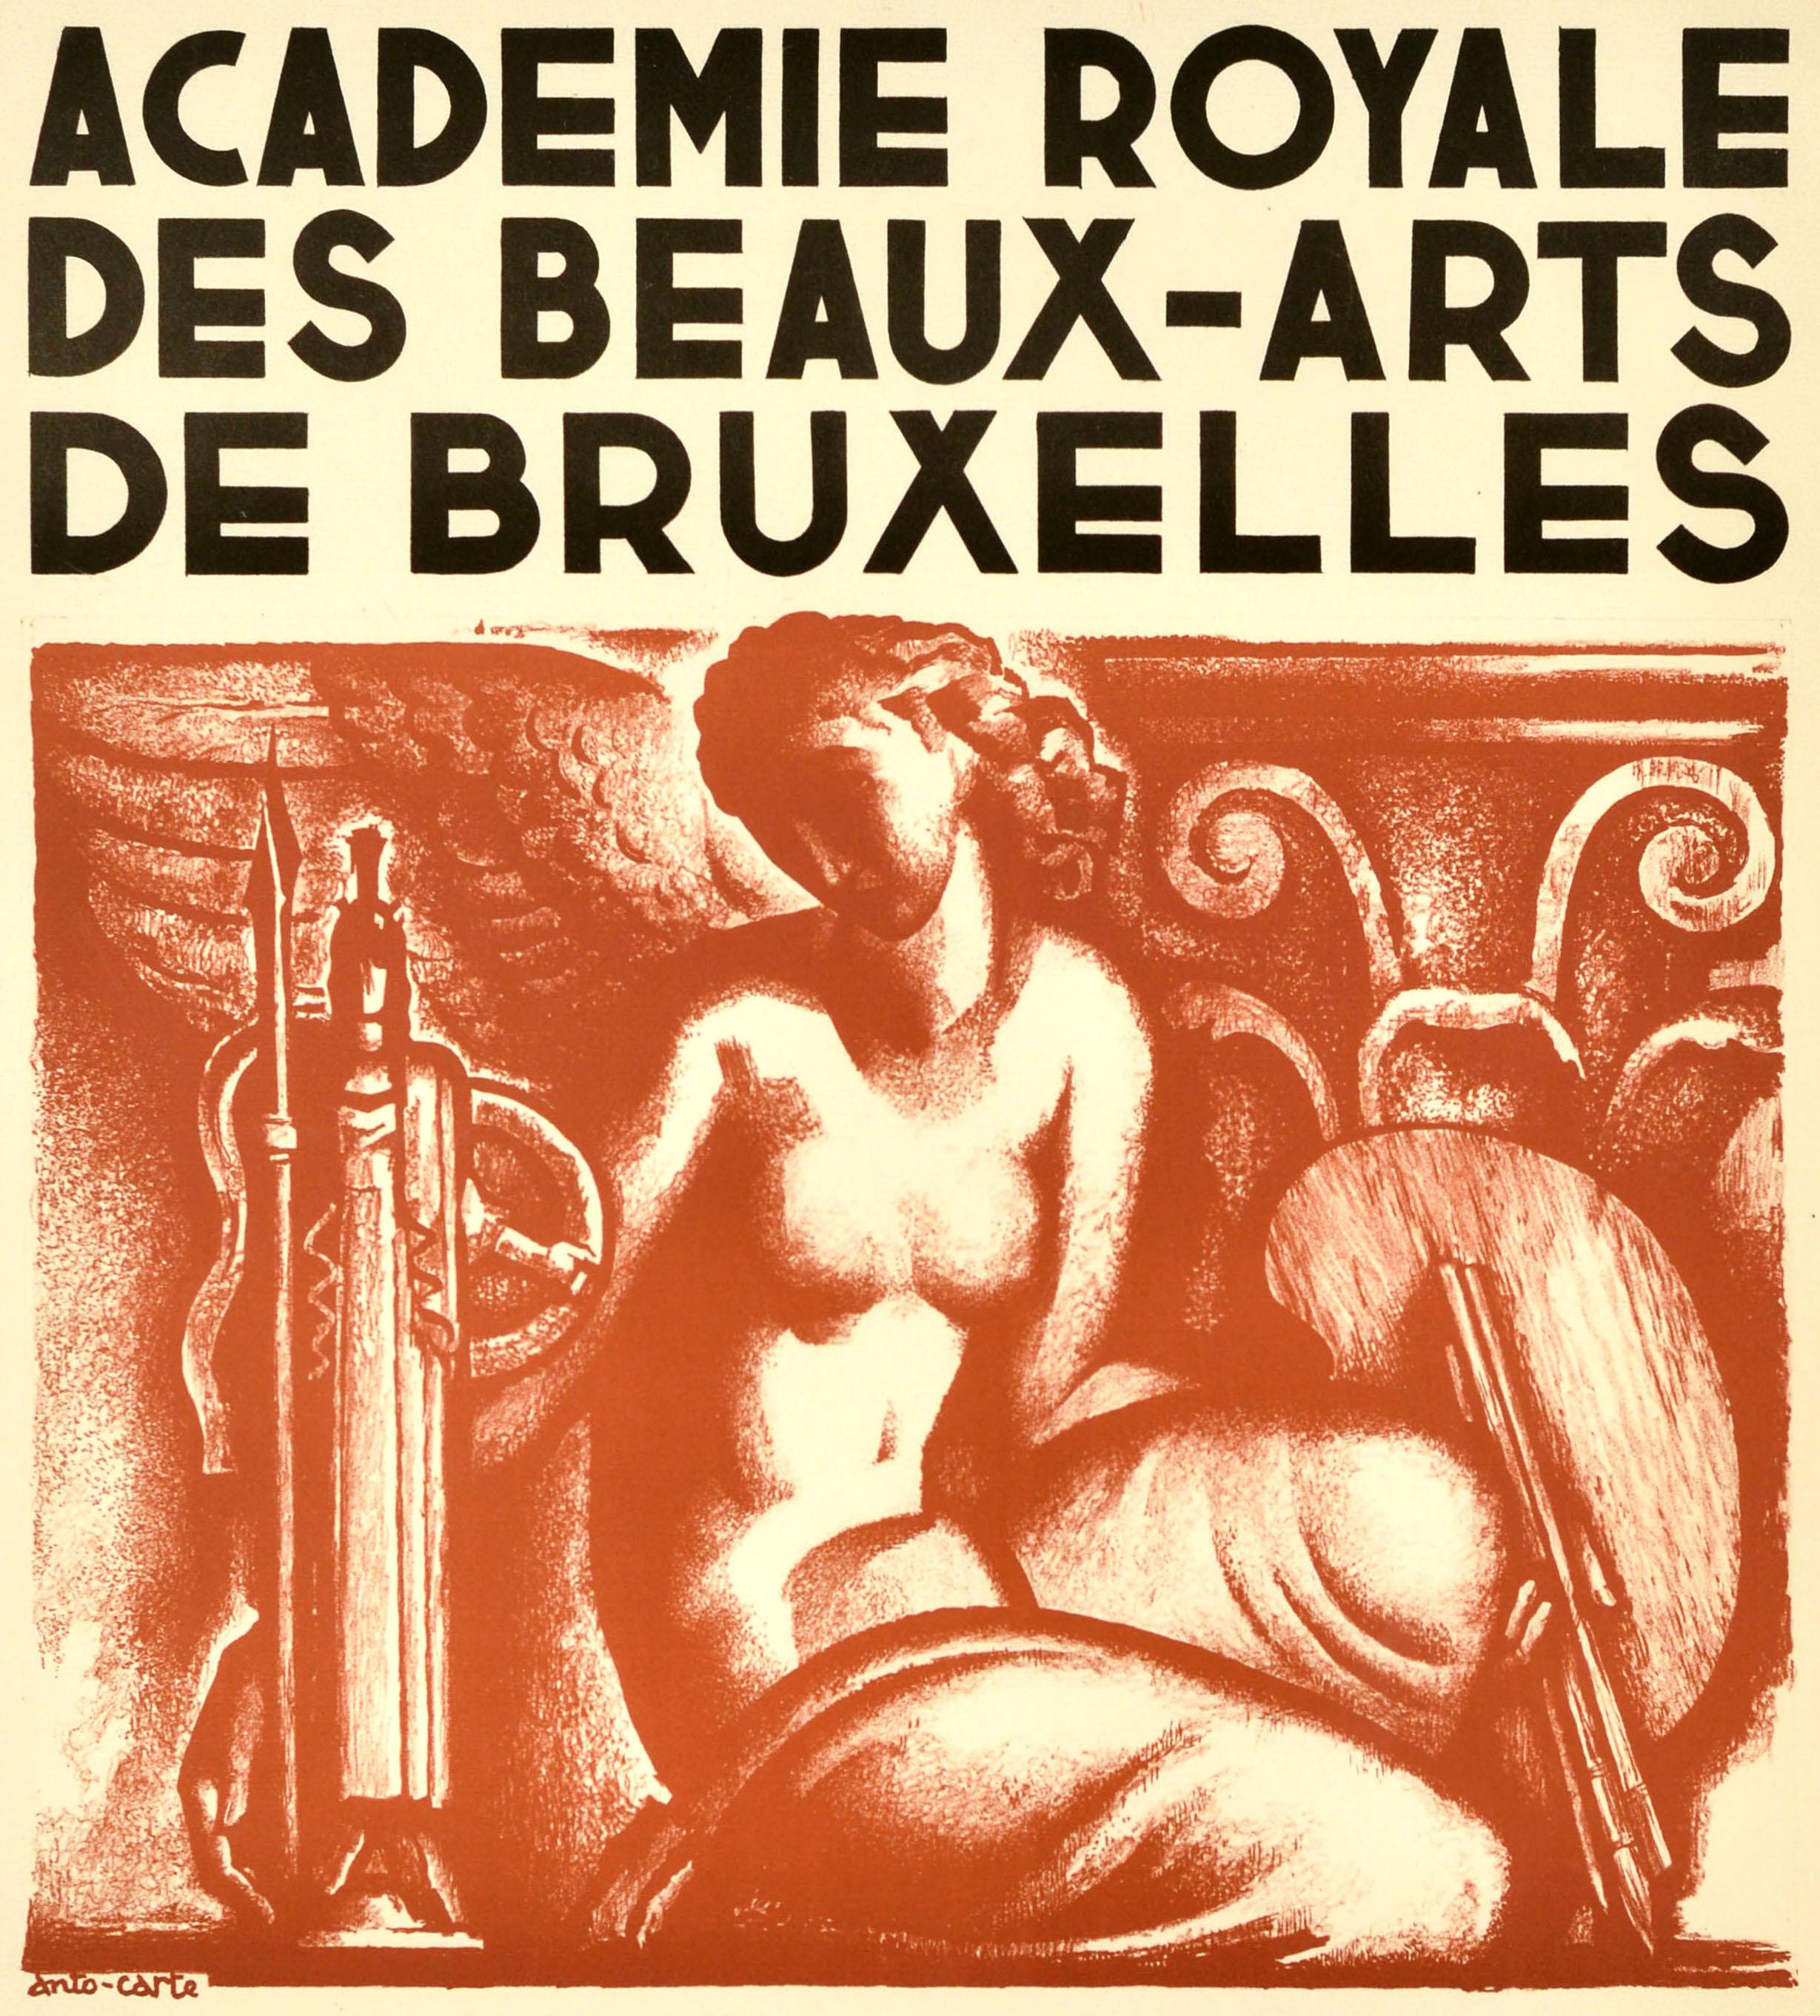 Original vintage advertising poster for the Royal Academy of Fine Arts of Brussels / Academie Royale des Beaux-Arts de Bruxelles featuring artwork by Anto Carte (1886-1954) depicting a lady holding paint brushes kneeling down next to a statue of a